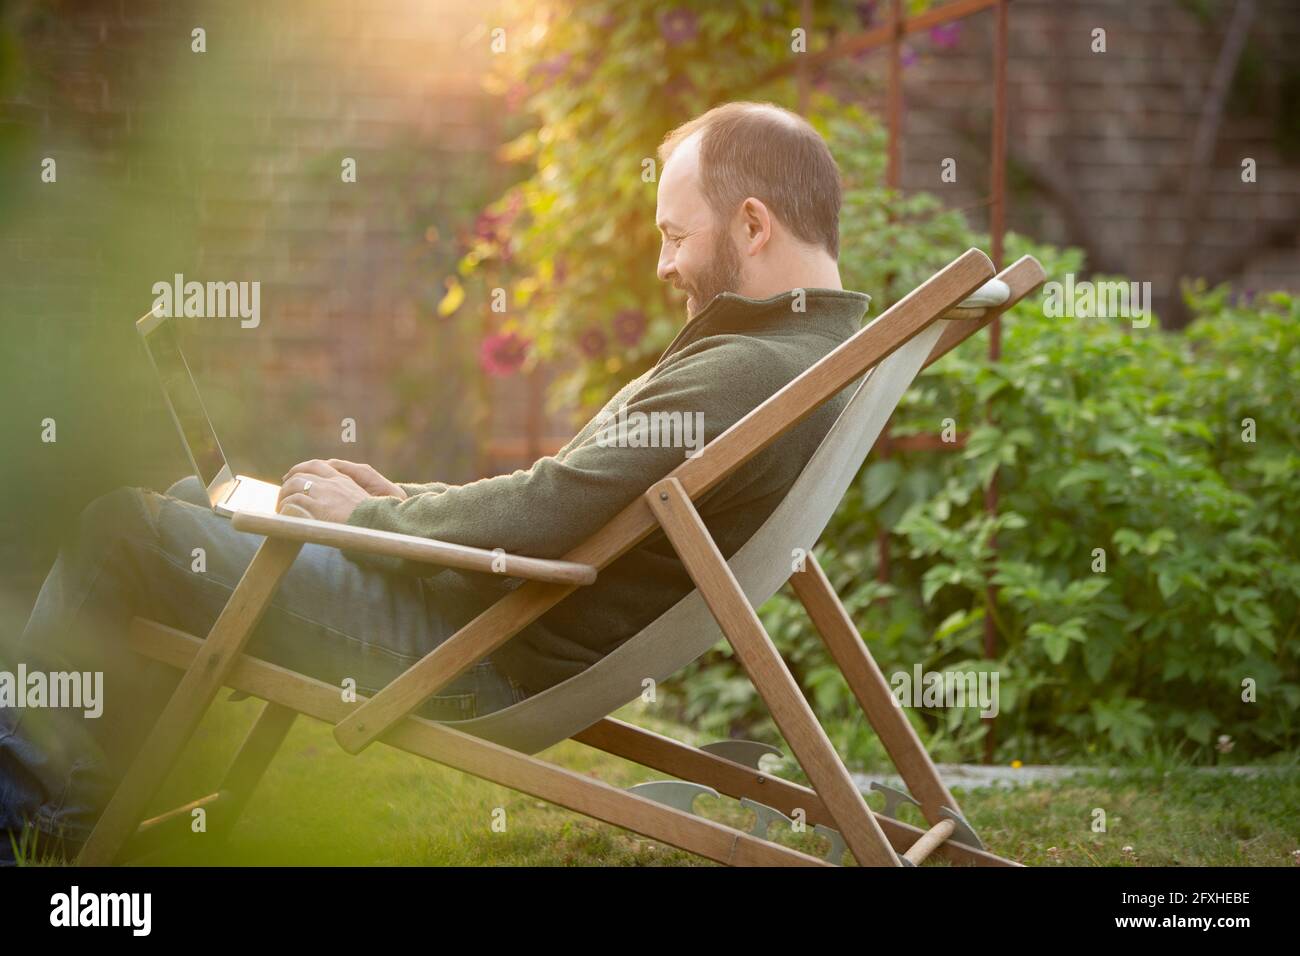 Man working at laptop in lawn chair in summer garden Stock Photo